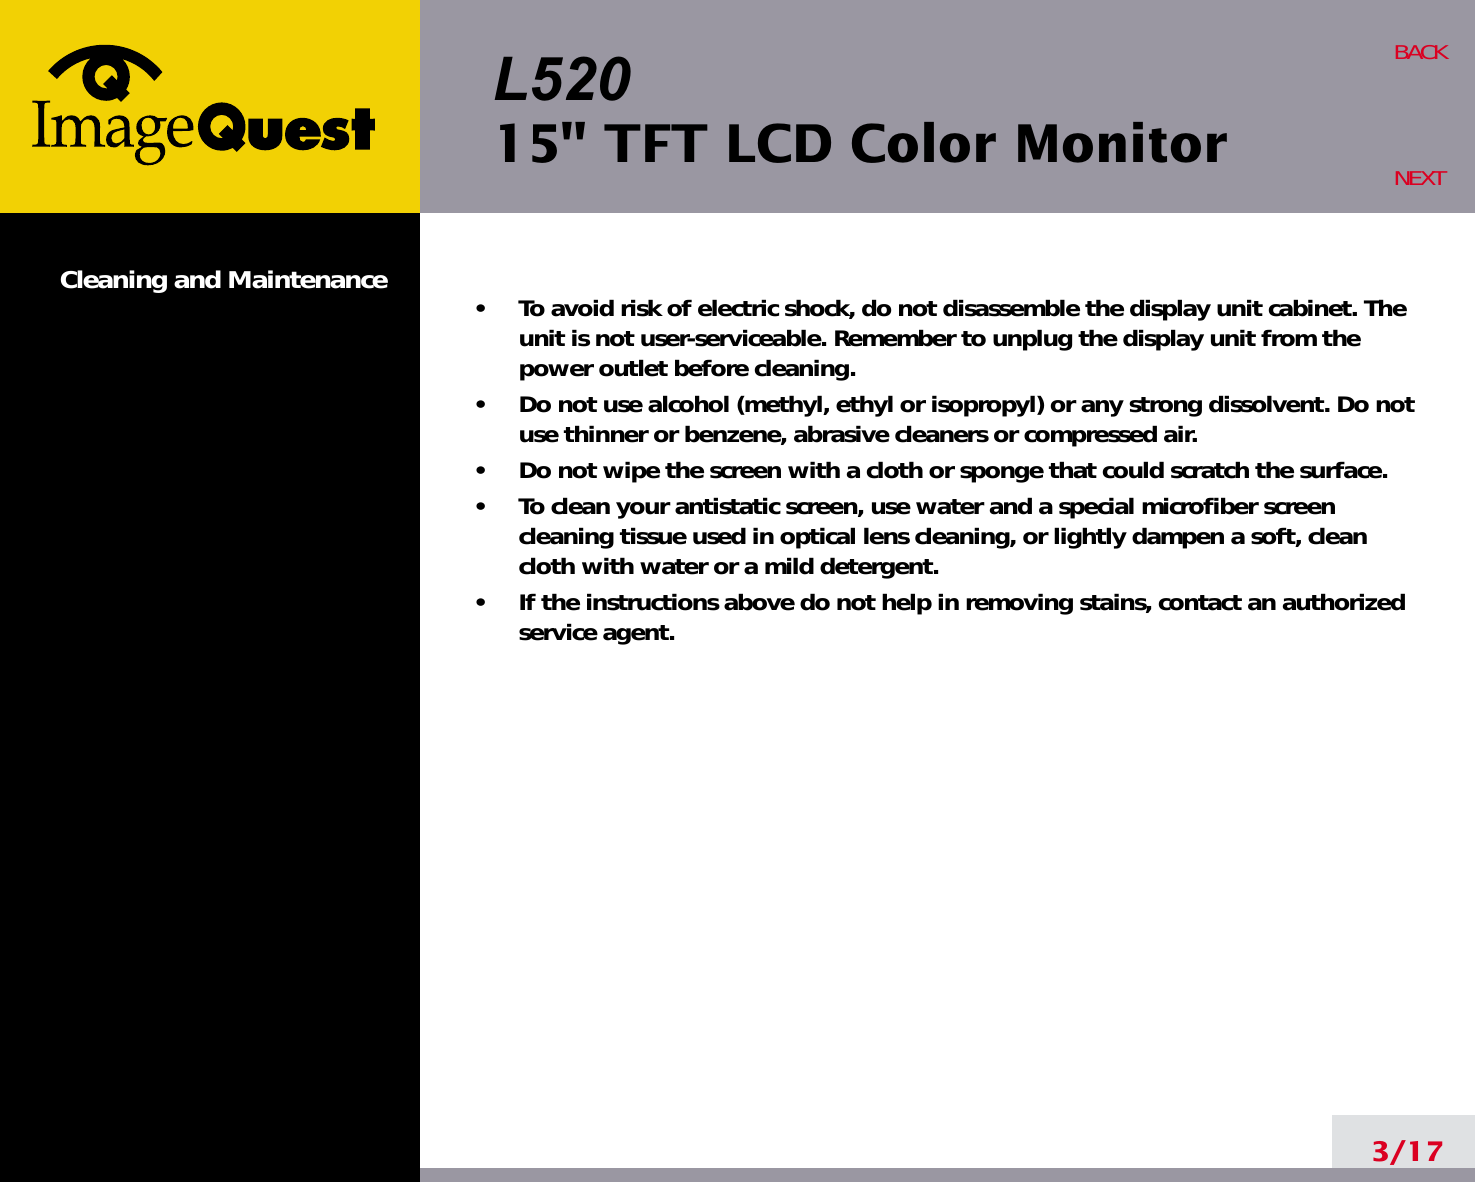 L52015&quot; TFT LCD Color MonitorCleaning and Maintenance •     To avoid risk of electric shock, do not disassemble the display unit cabinet. Theunit is not user-serviceable. Remember to unplug the display unit from thepower outlet before cleaning.•     Do not use alcohol (methyl, ethyl or isopropyl) or any strong dissolvent. Do notuse thinner or benzene, abrasive cleaners or compressed air.•     Do not wipe the screen with a cloth or sponge that could scratch the surface.•     To clean your antistatic screen, use water and a special microfiber screencleaning tissue used in optical lens cleaning, or lightly dampen a soft, cleancloth with water or a mild detergent.•     If the instructions above do not help in removing stains, contact an authorizedservice agent. 3/17BACKNEXT